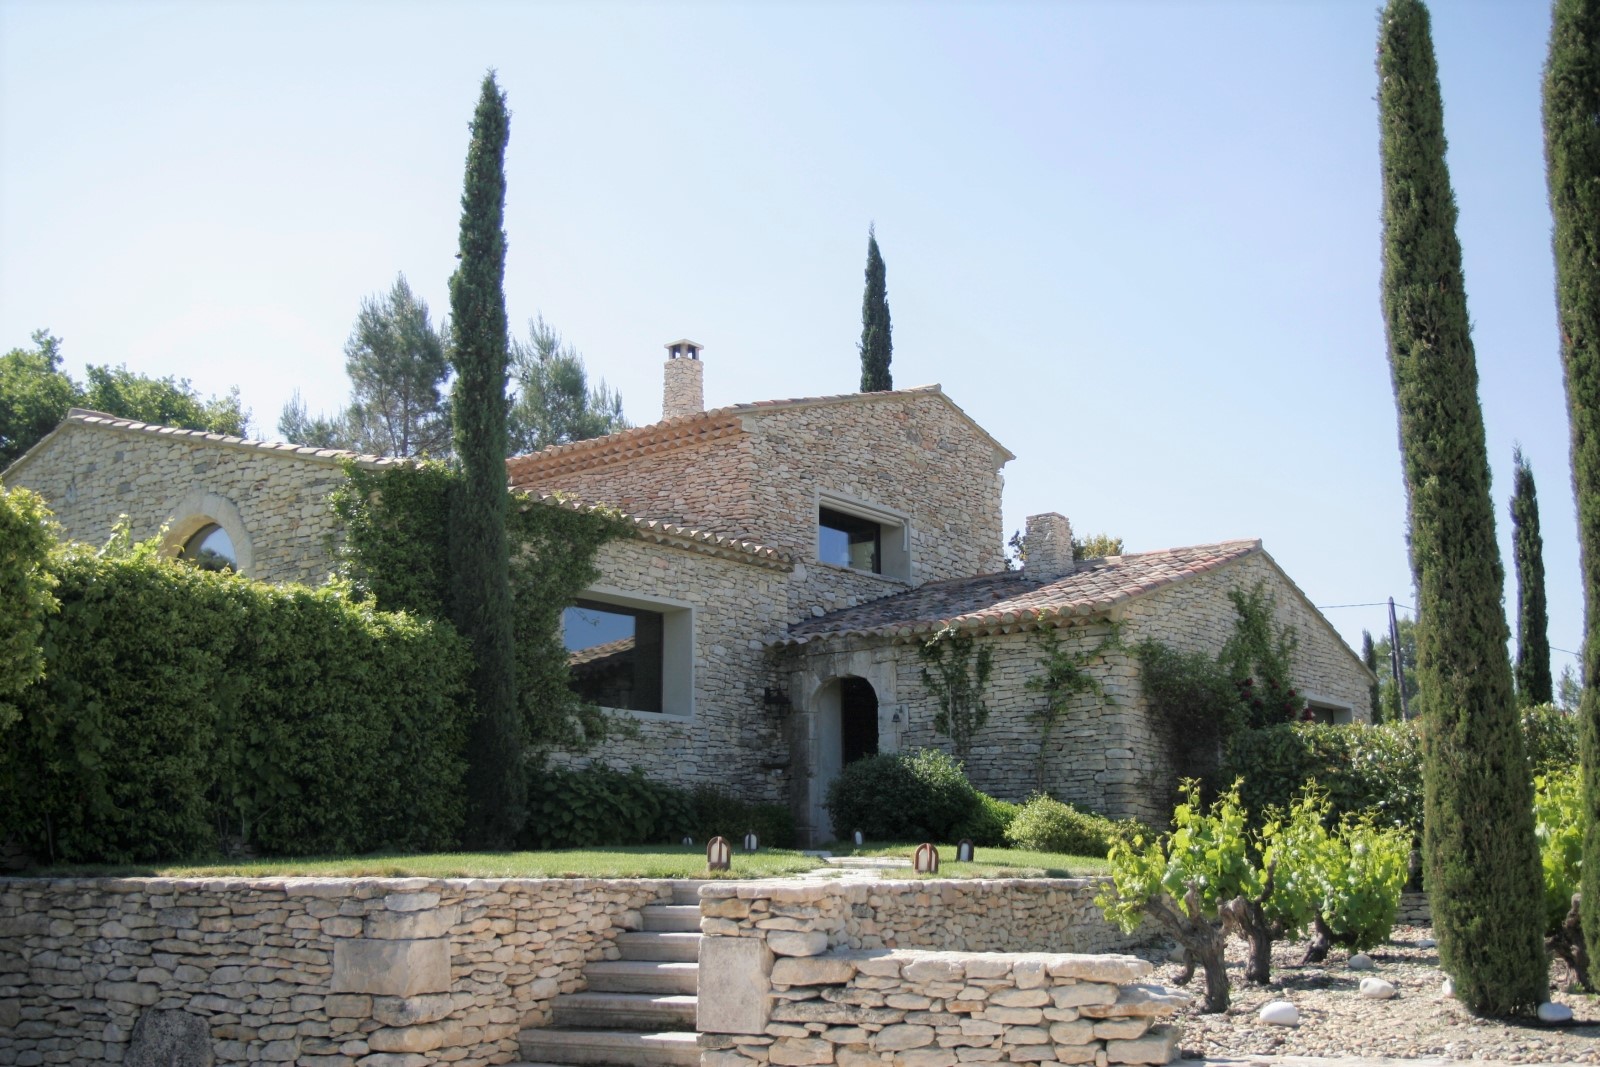 Façade and garden with vines and trees at Le Clos in Provence, France